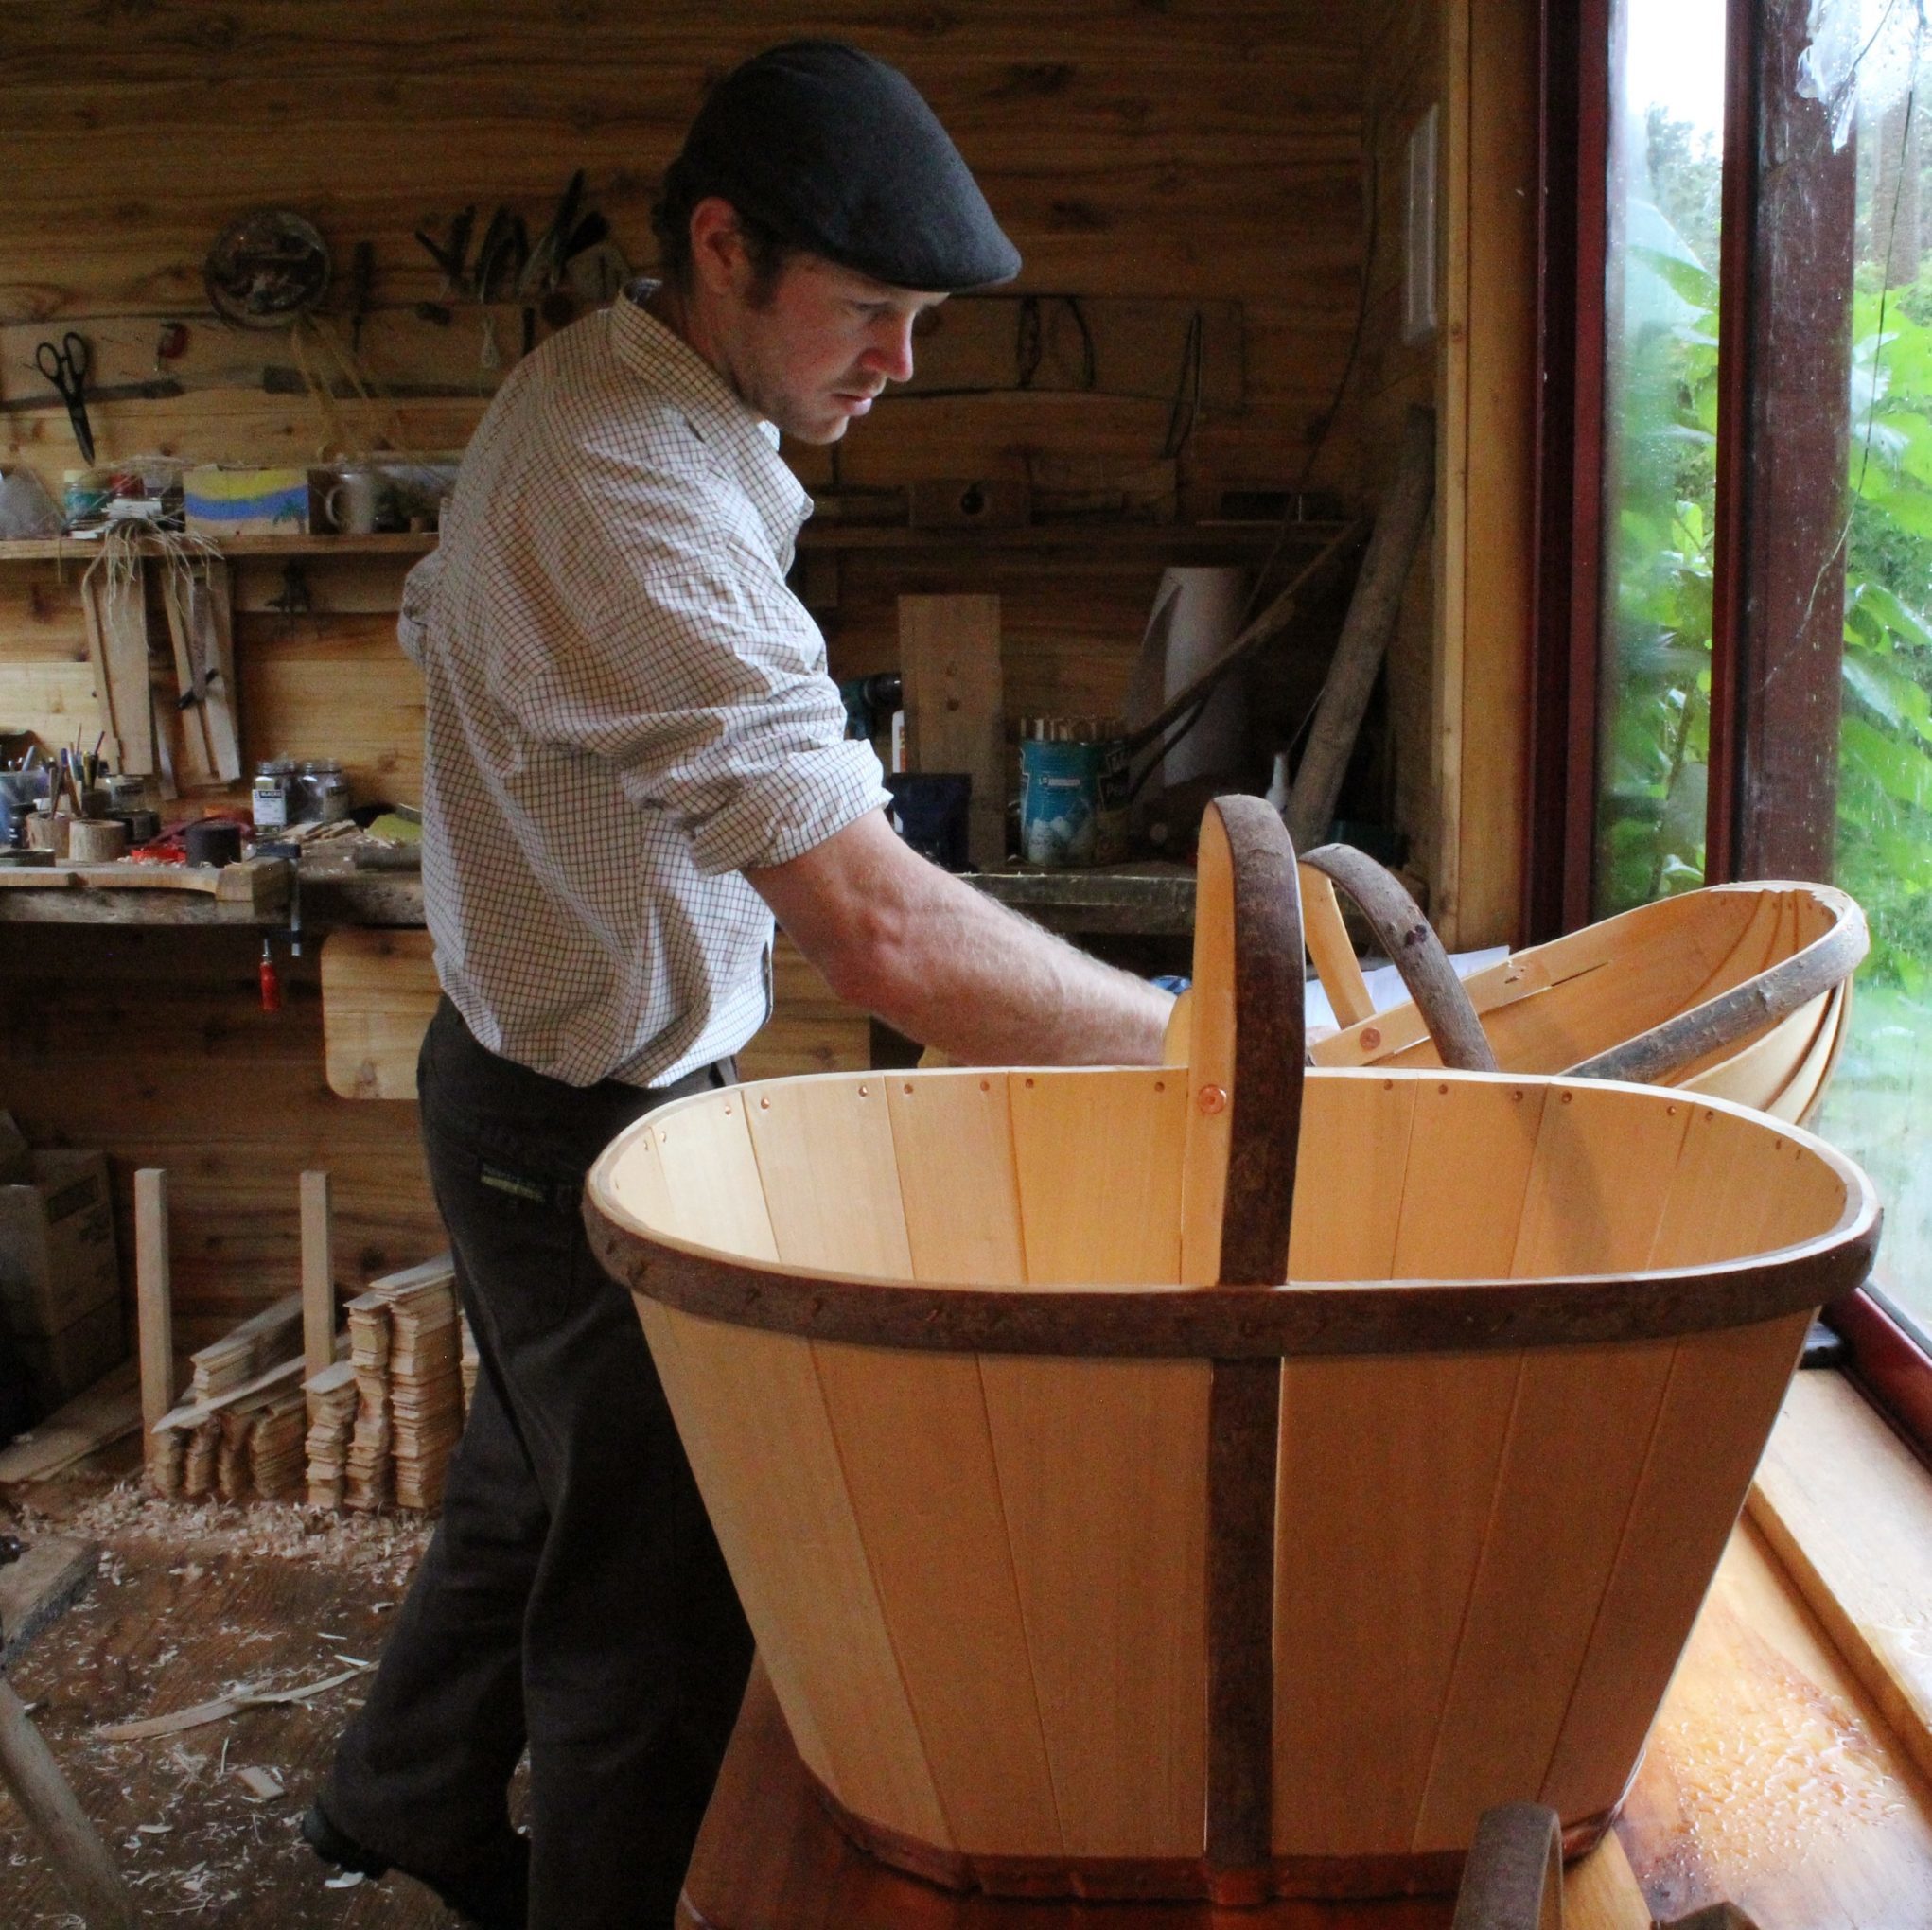 Tony in his workshop with a trug in the foreground